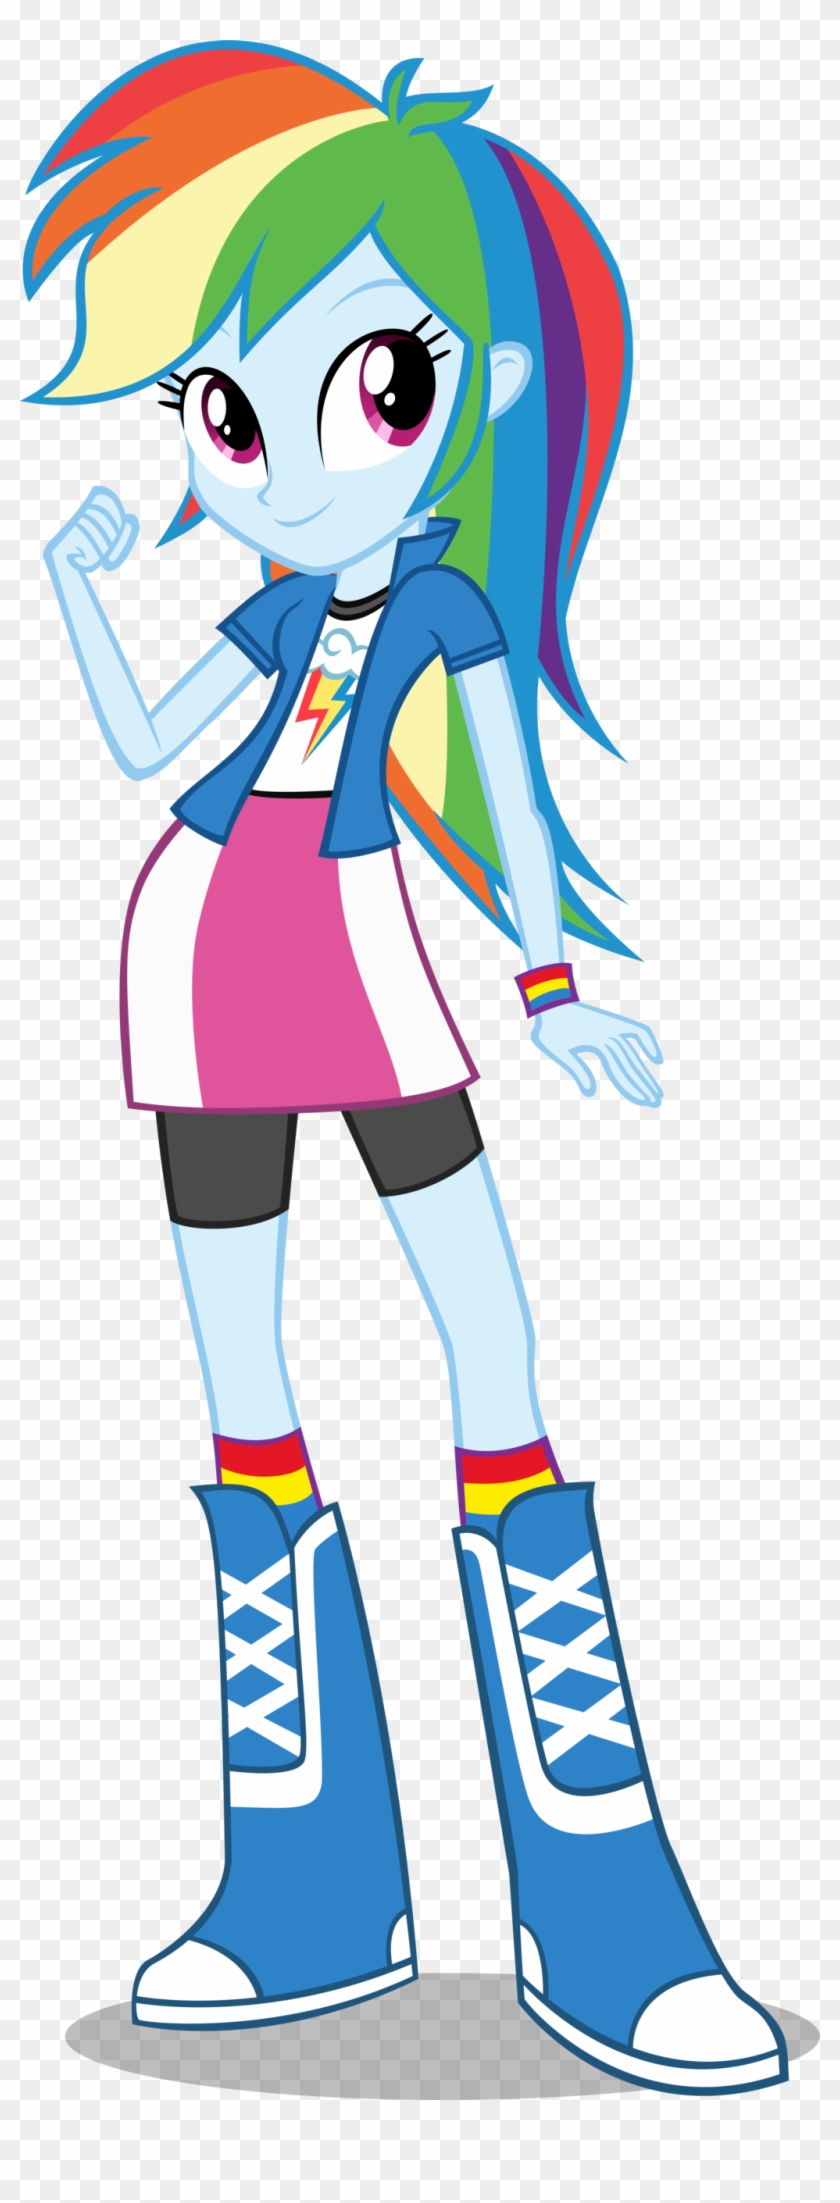 Inspiration For A Rainbow Dash Costume From The New - Equestria Girl 3 Rainbow Dash Clipart #1749706